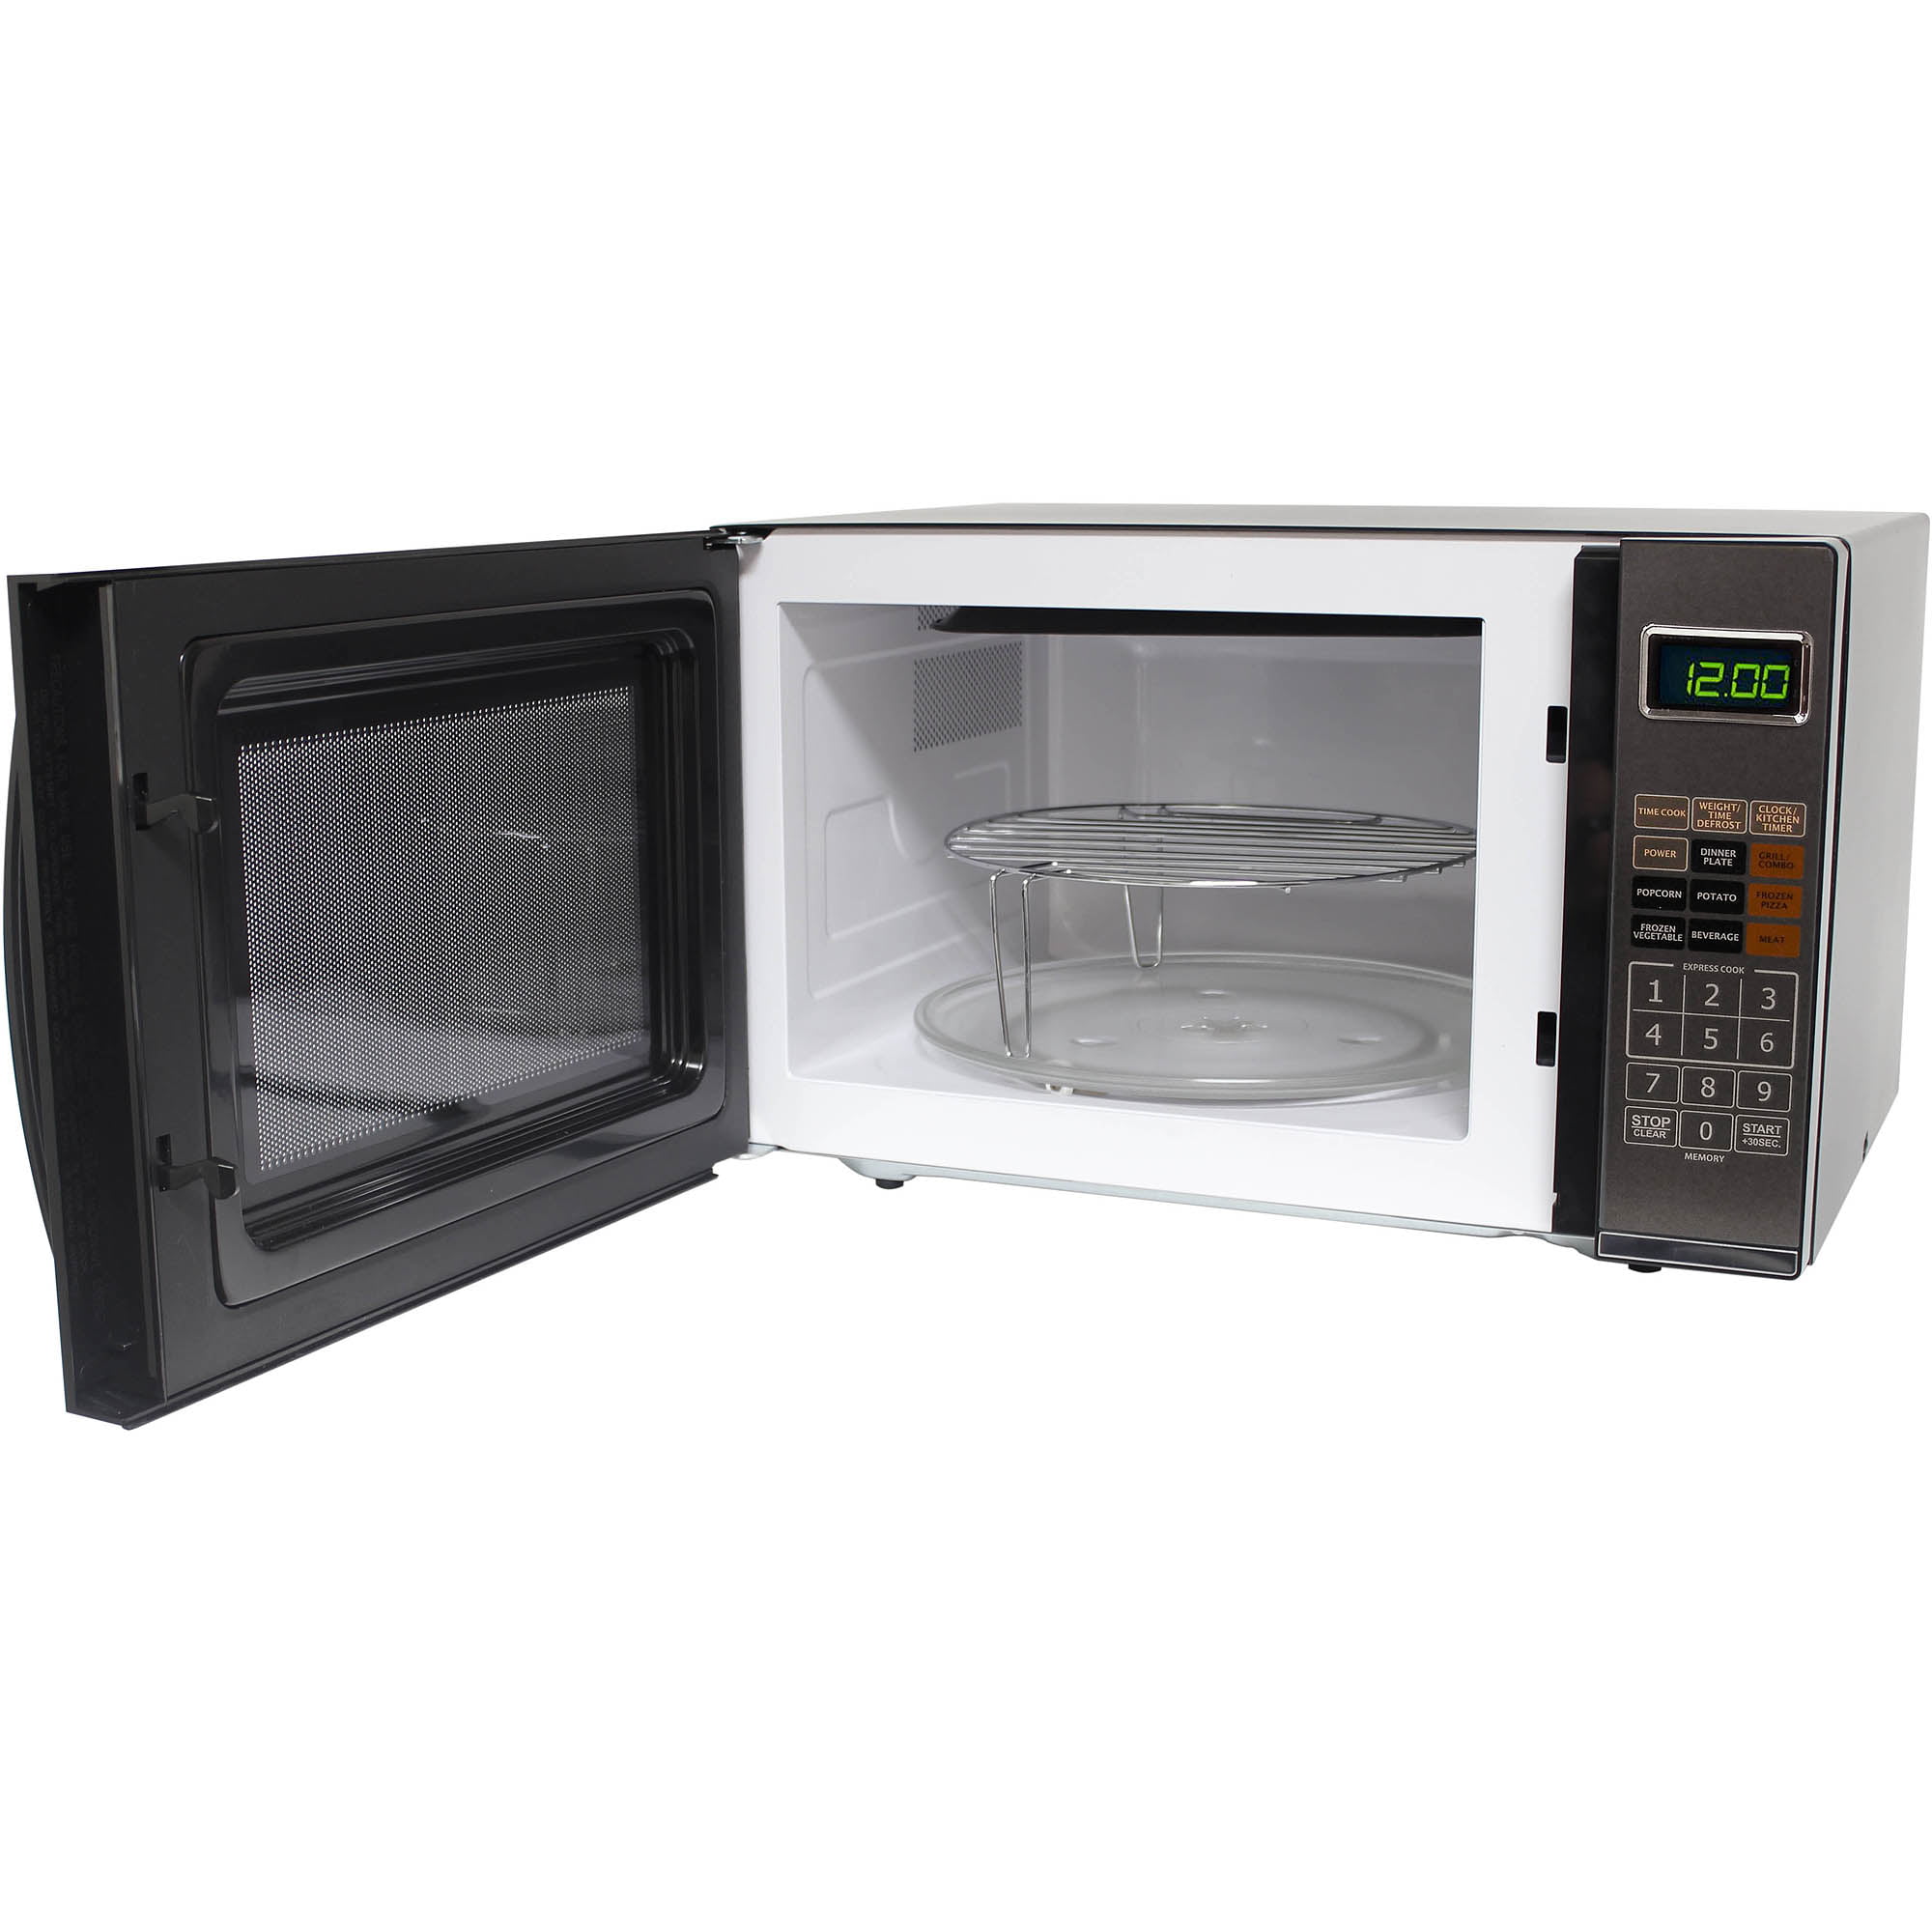 Refurbished Emerson 1 2 Cu Ft Microwave With Grill Black